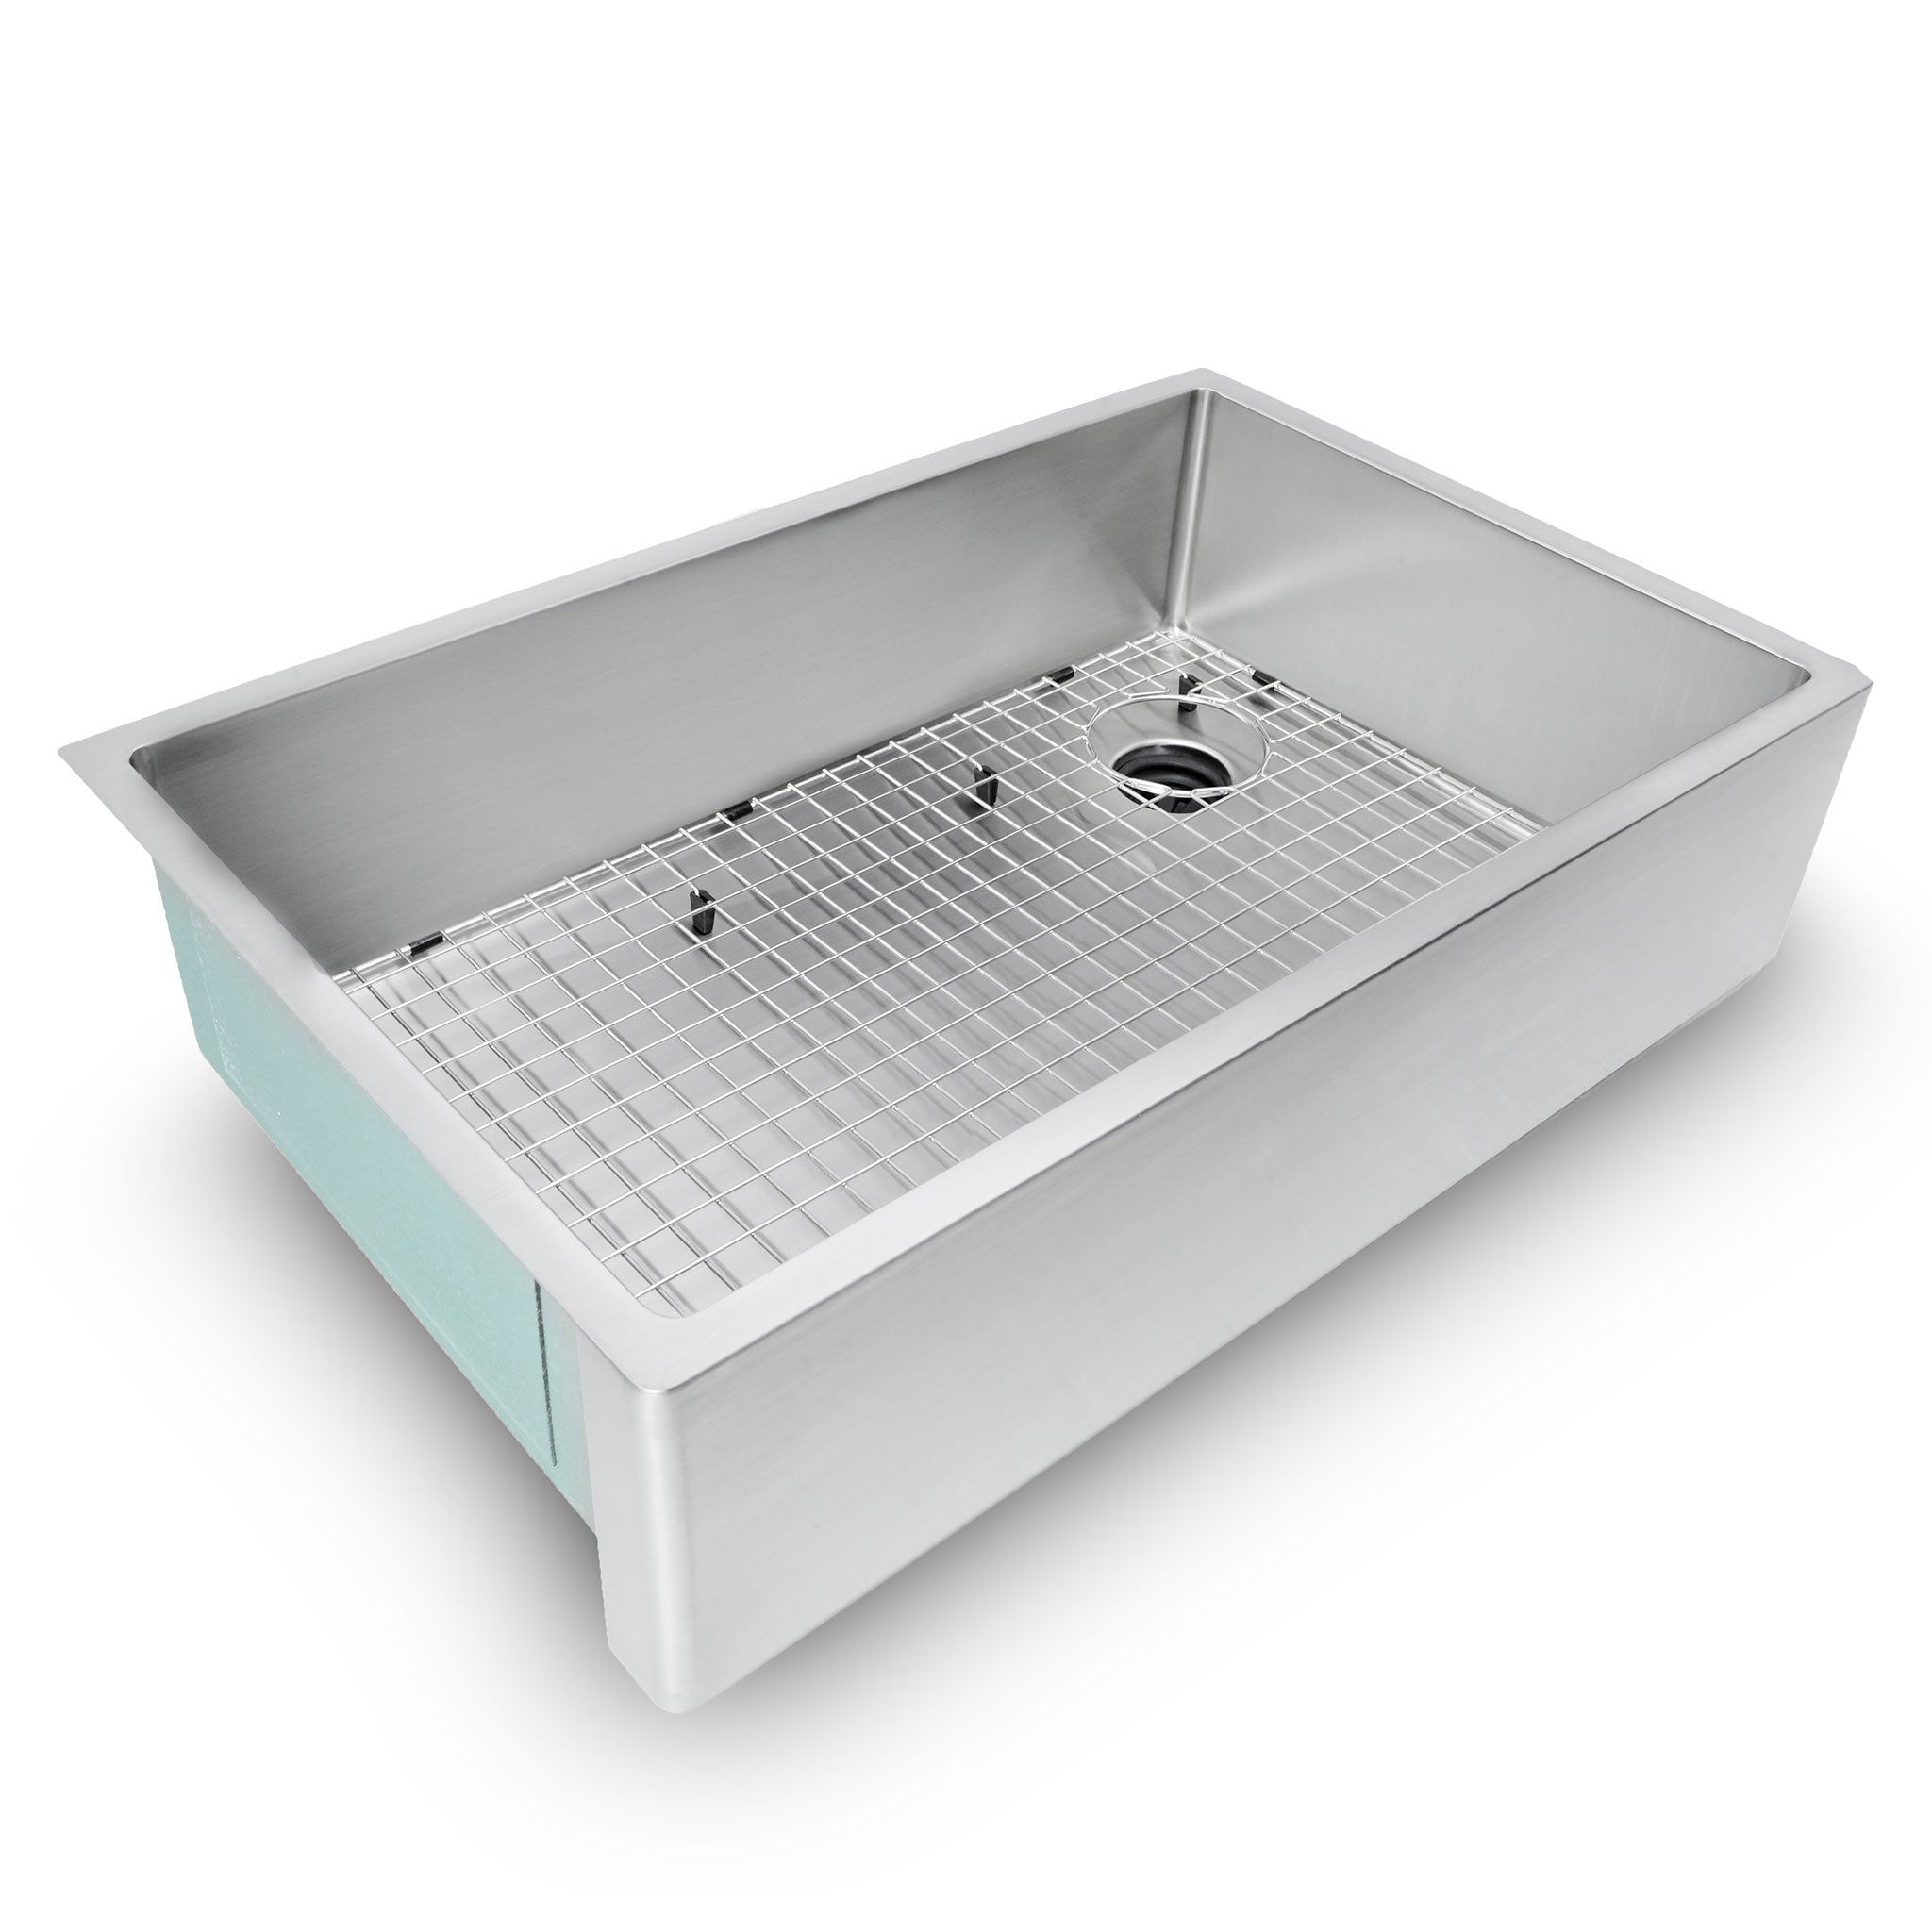 33" classic basin style farmhouse sink with a protective grate and seamless drain